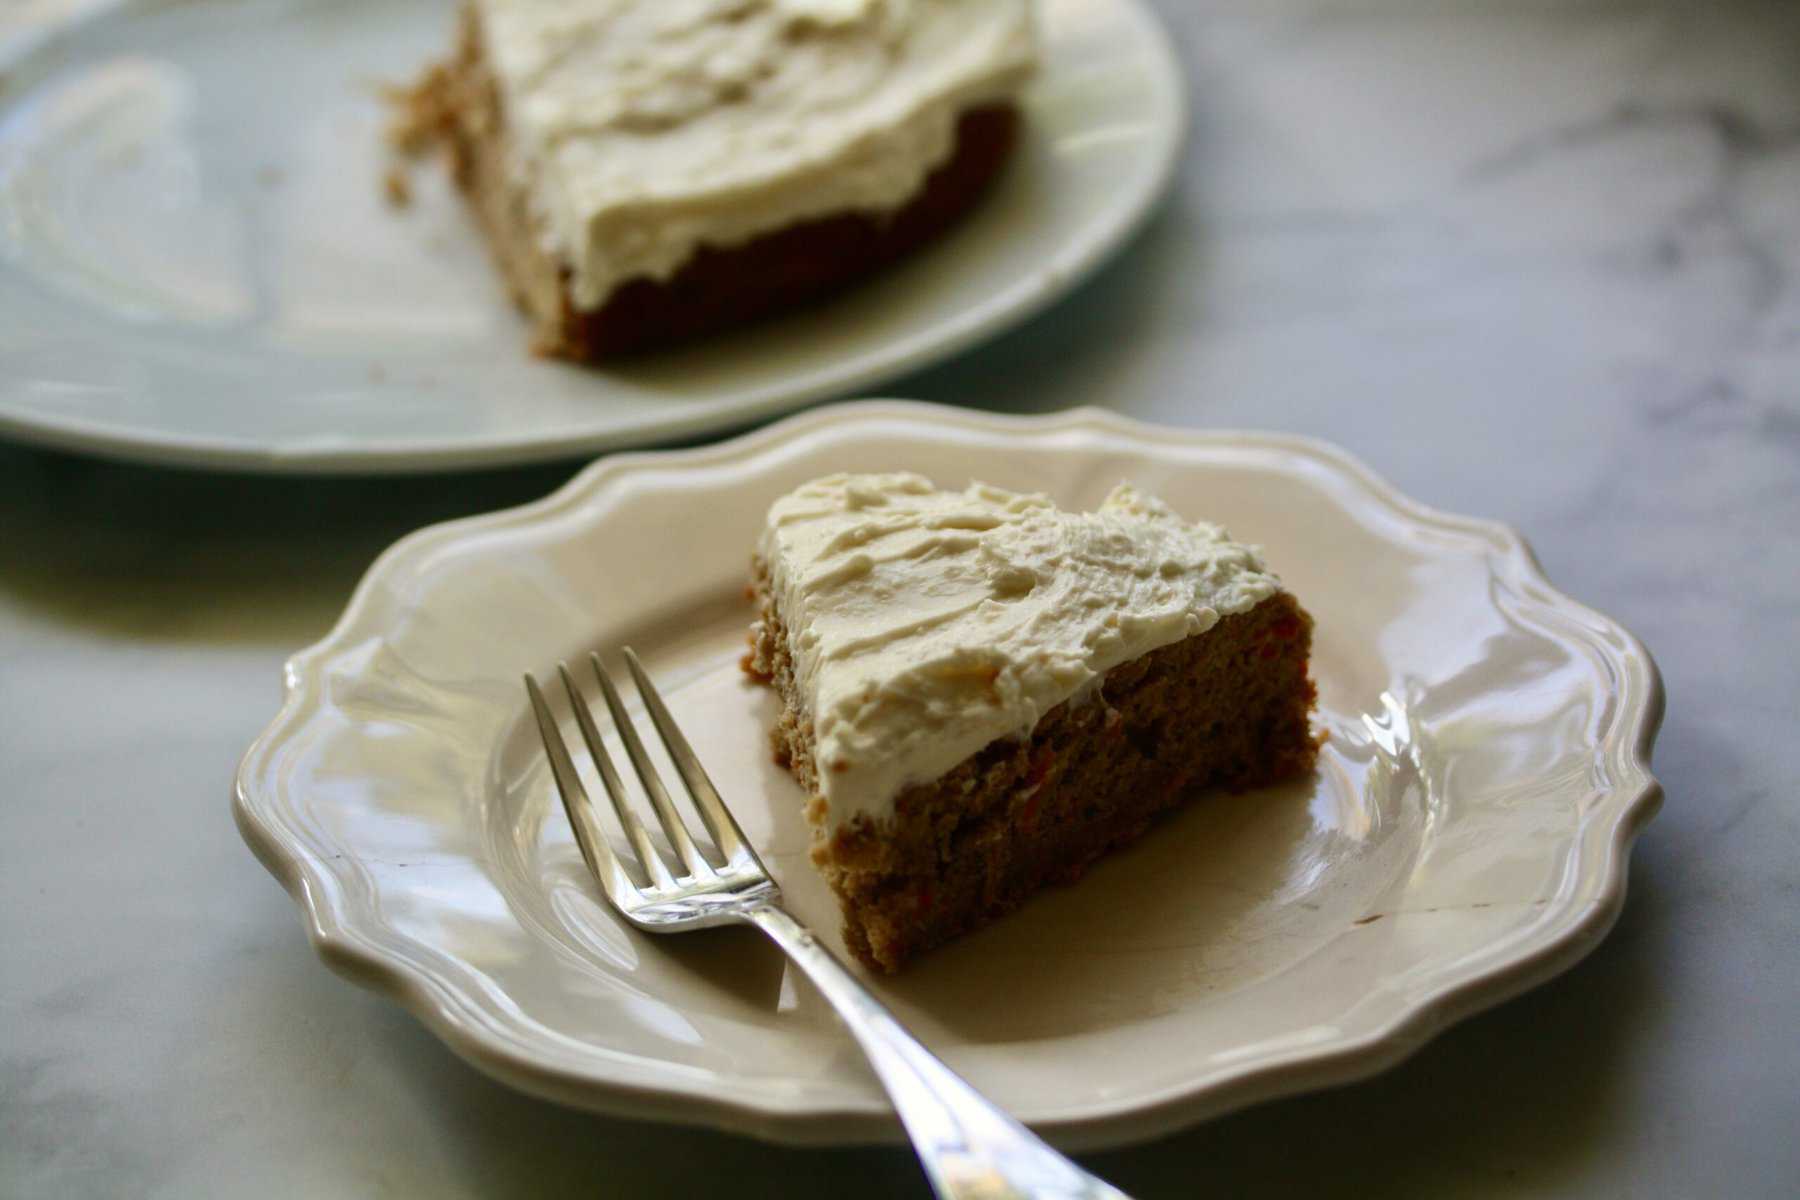 A slice of carrot cake on a plate with a fork with a carrot cake seen in the background.